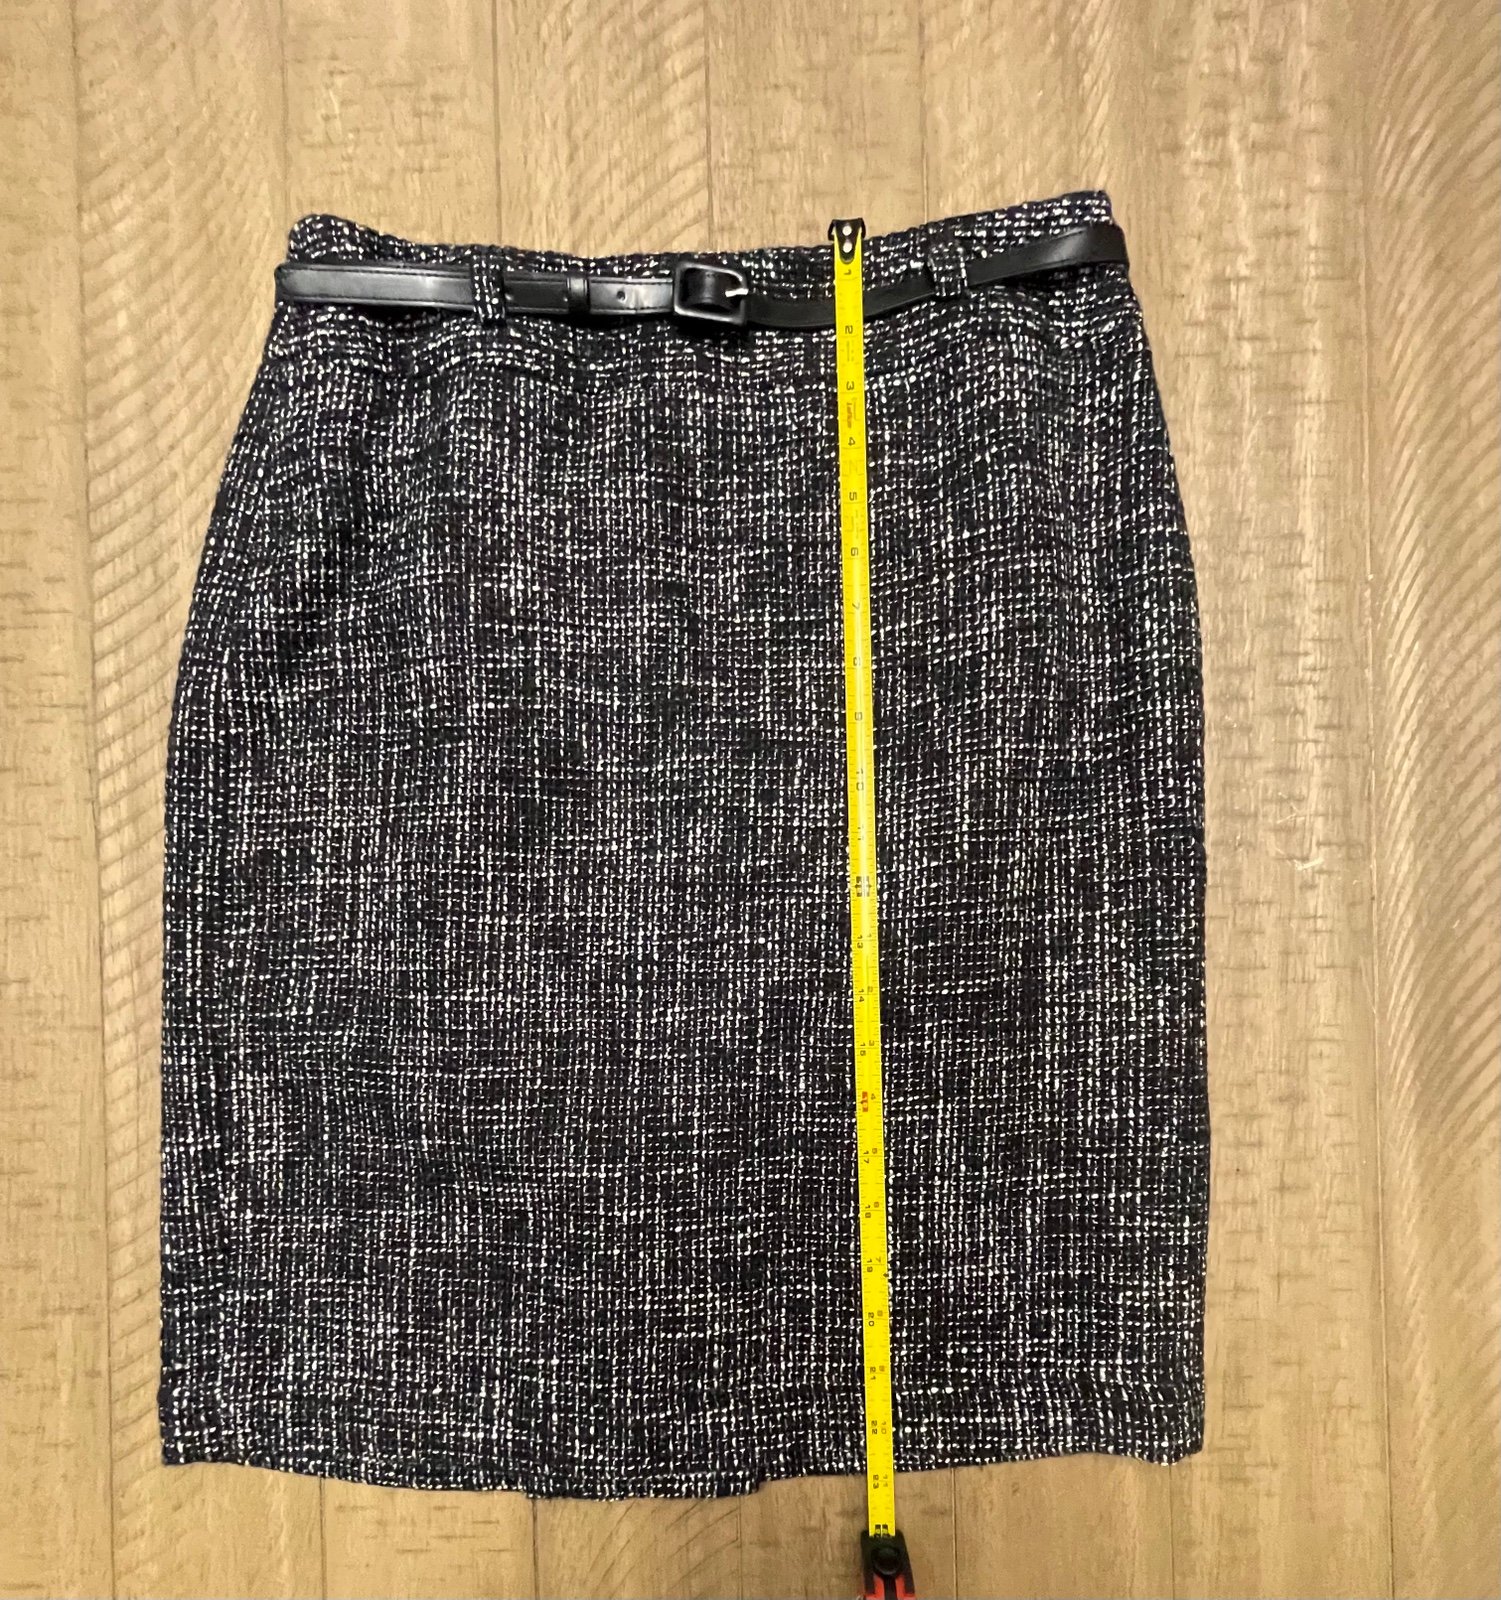 Exclusive Ann Taylor Loft Belted Pencil Skirt Size 6 pH349WXPK just buy it